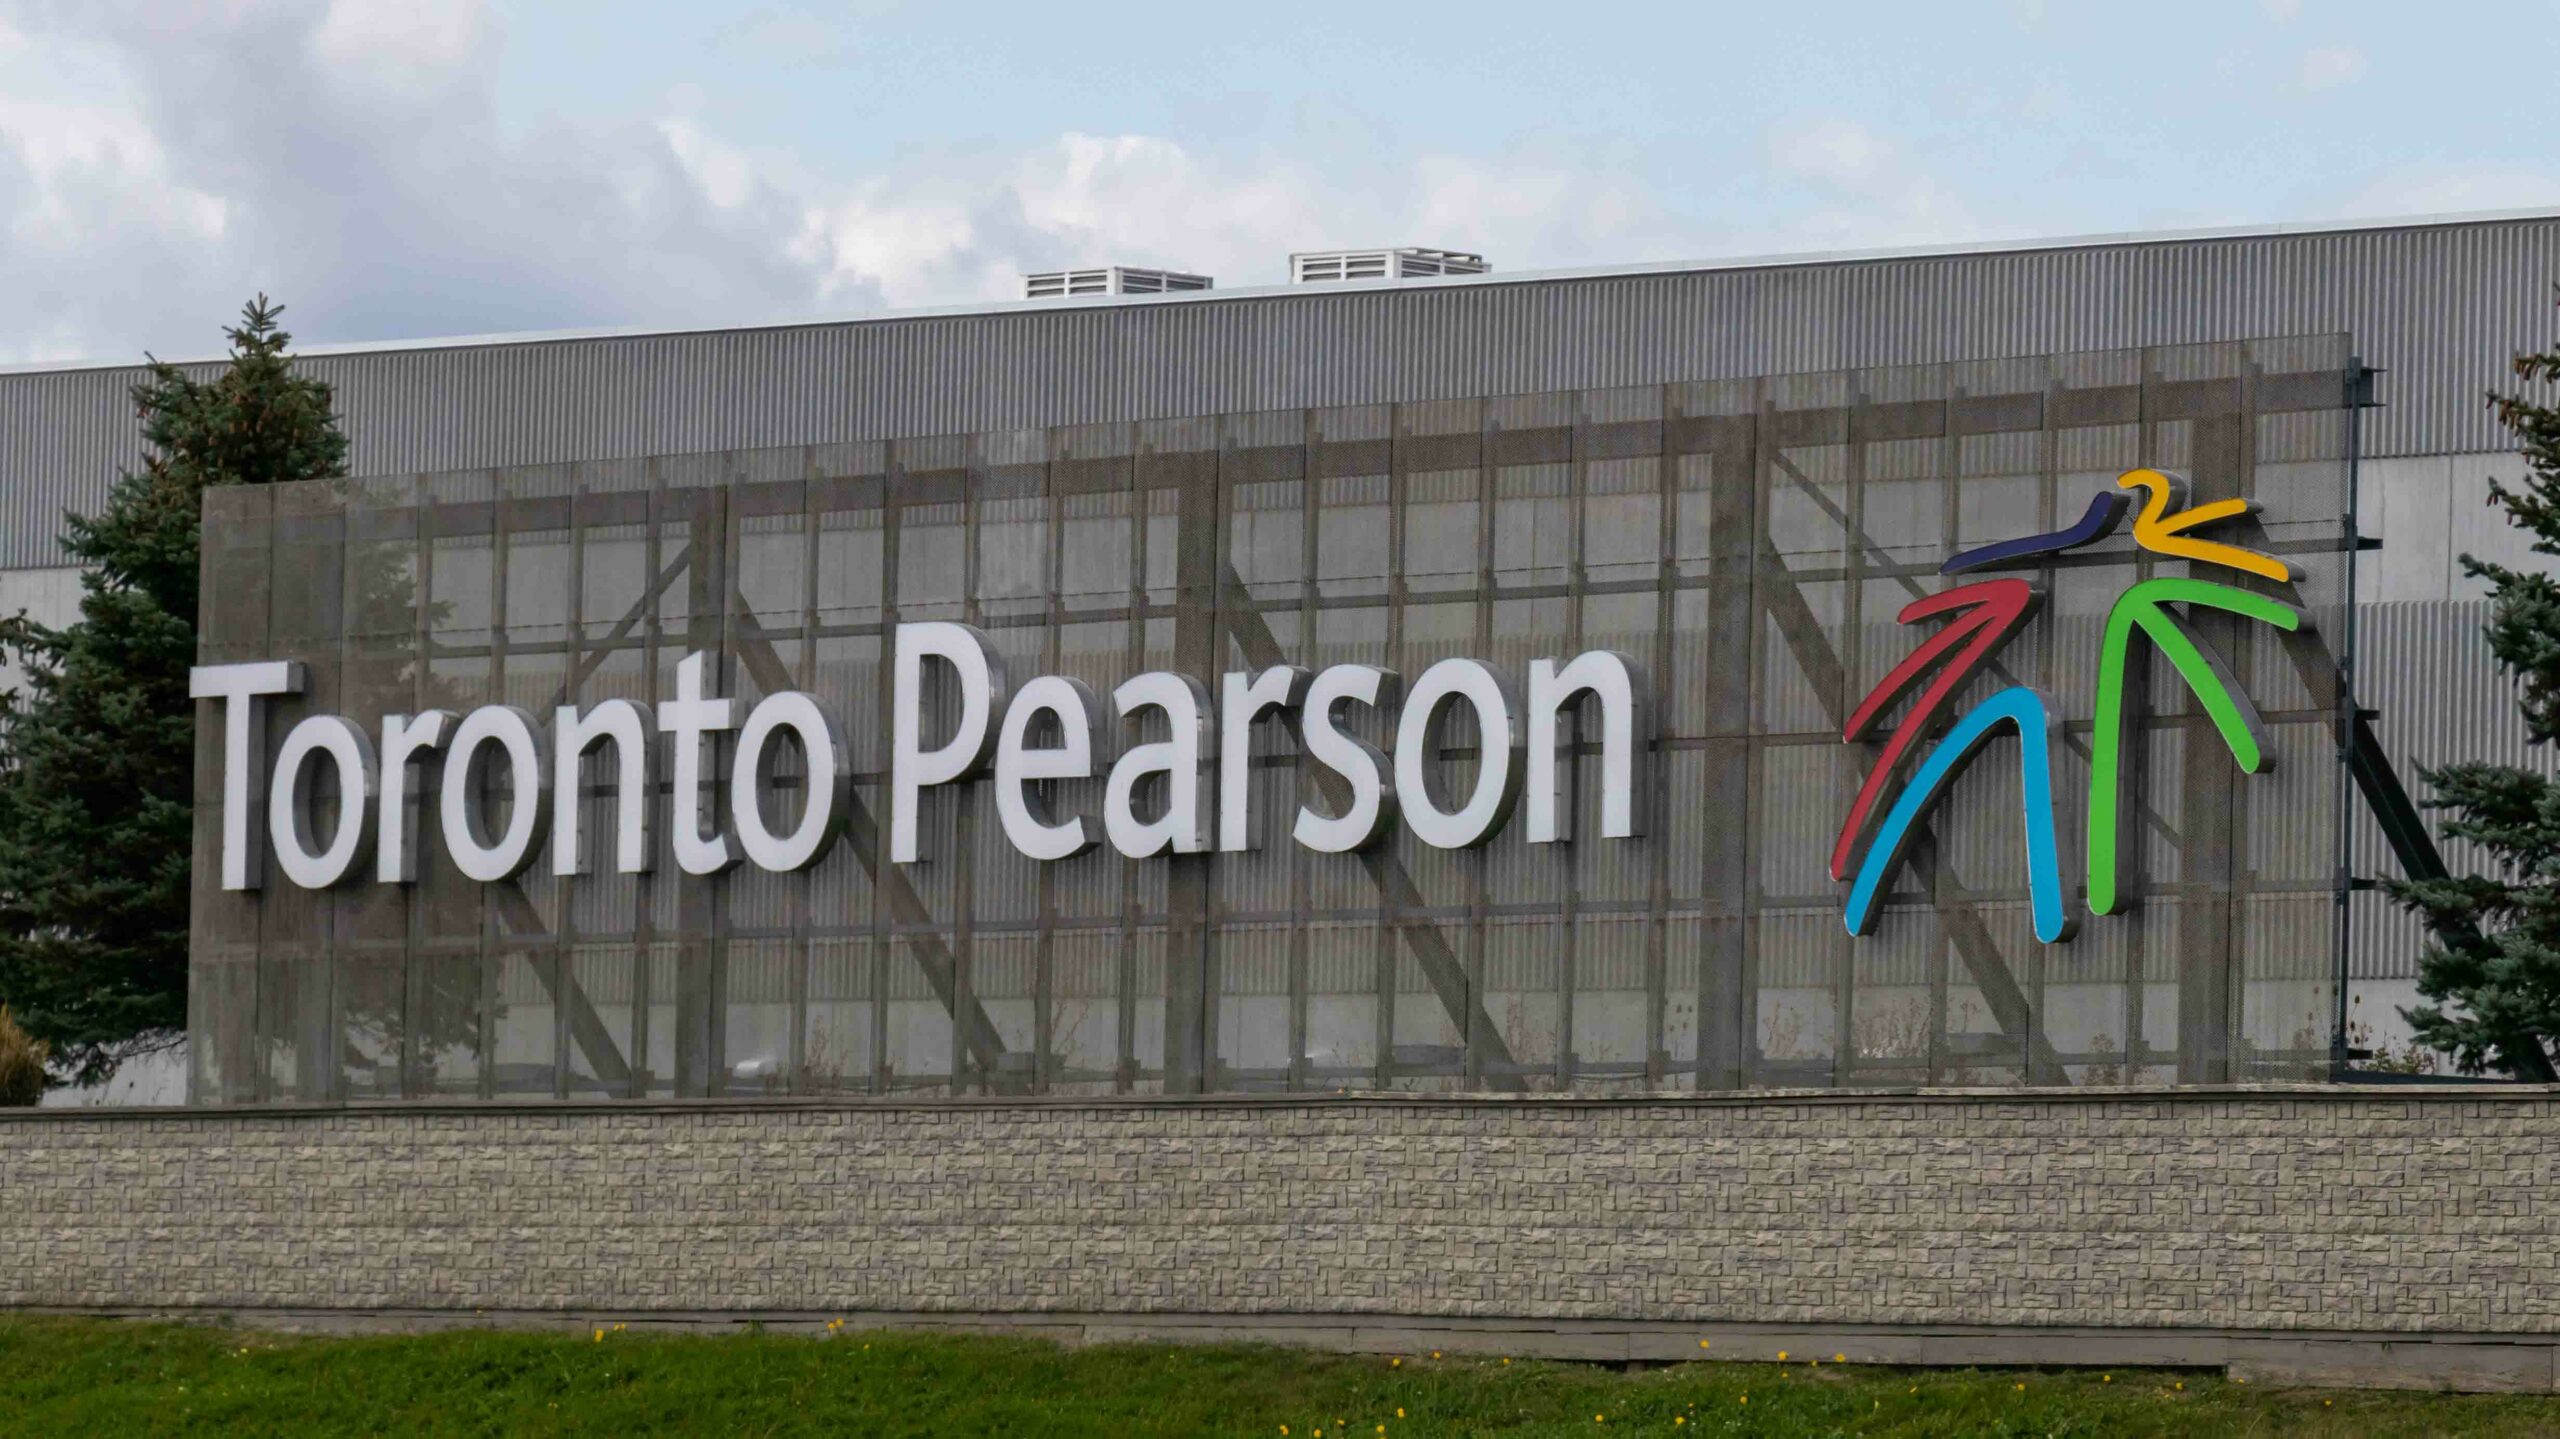 AI Technology Implemented at Pearson Airport to Minimize Baggage Wait Times.